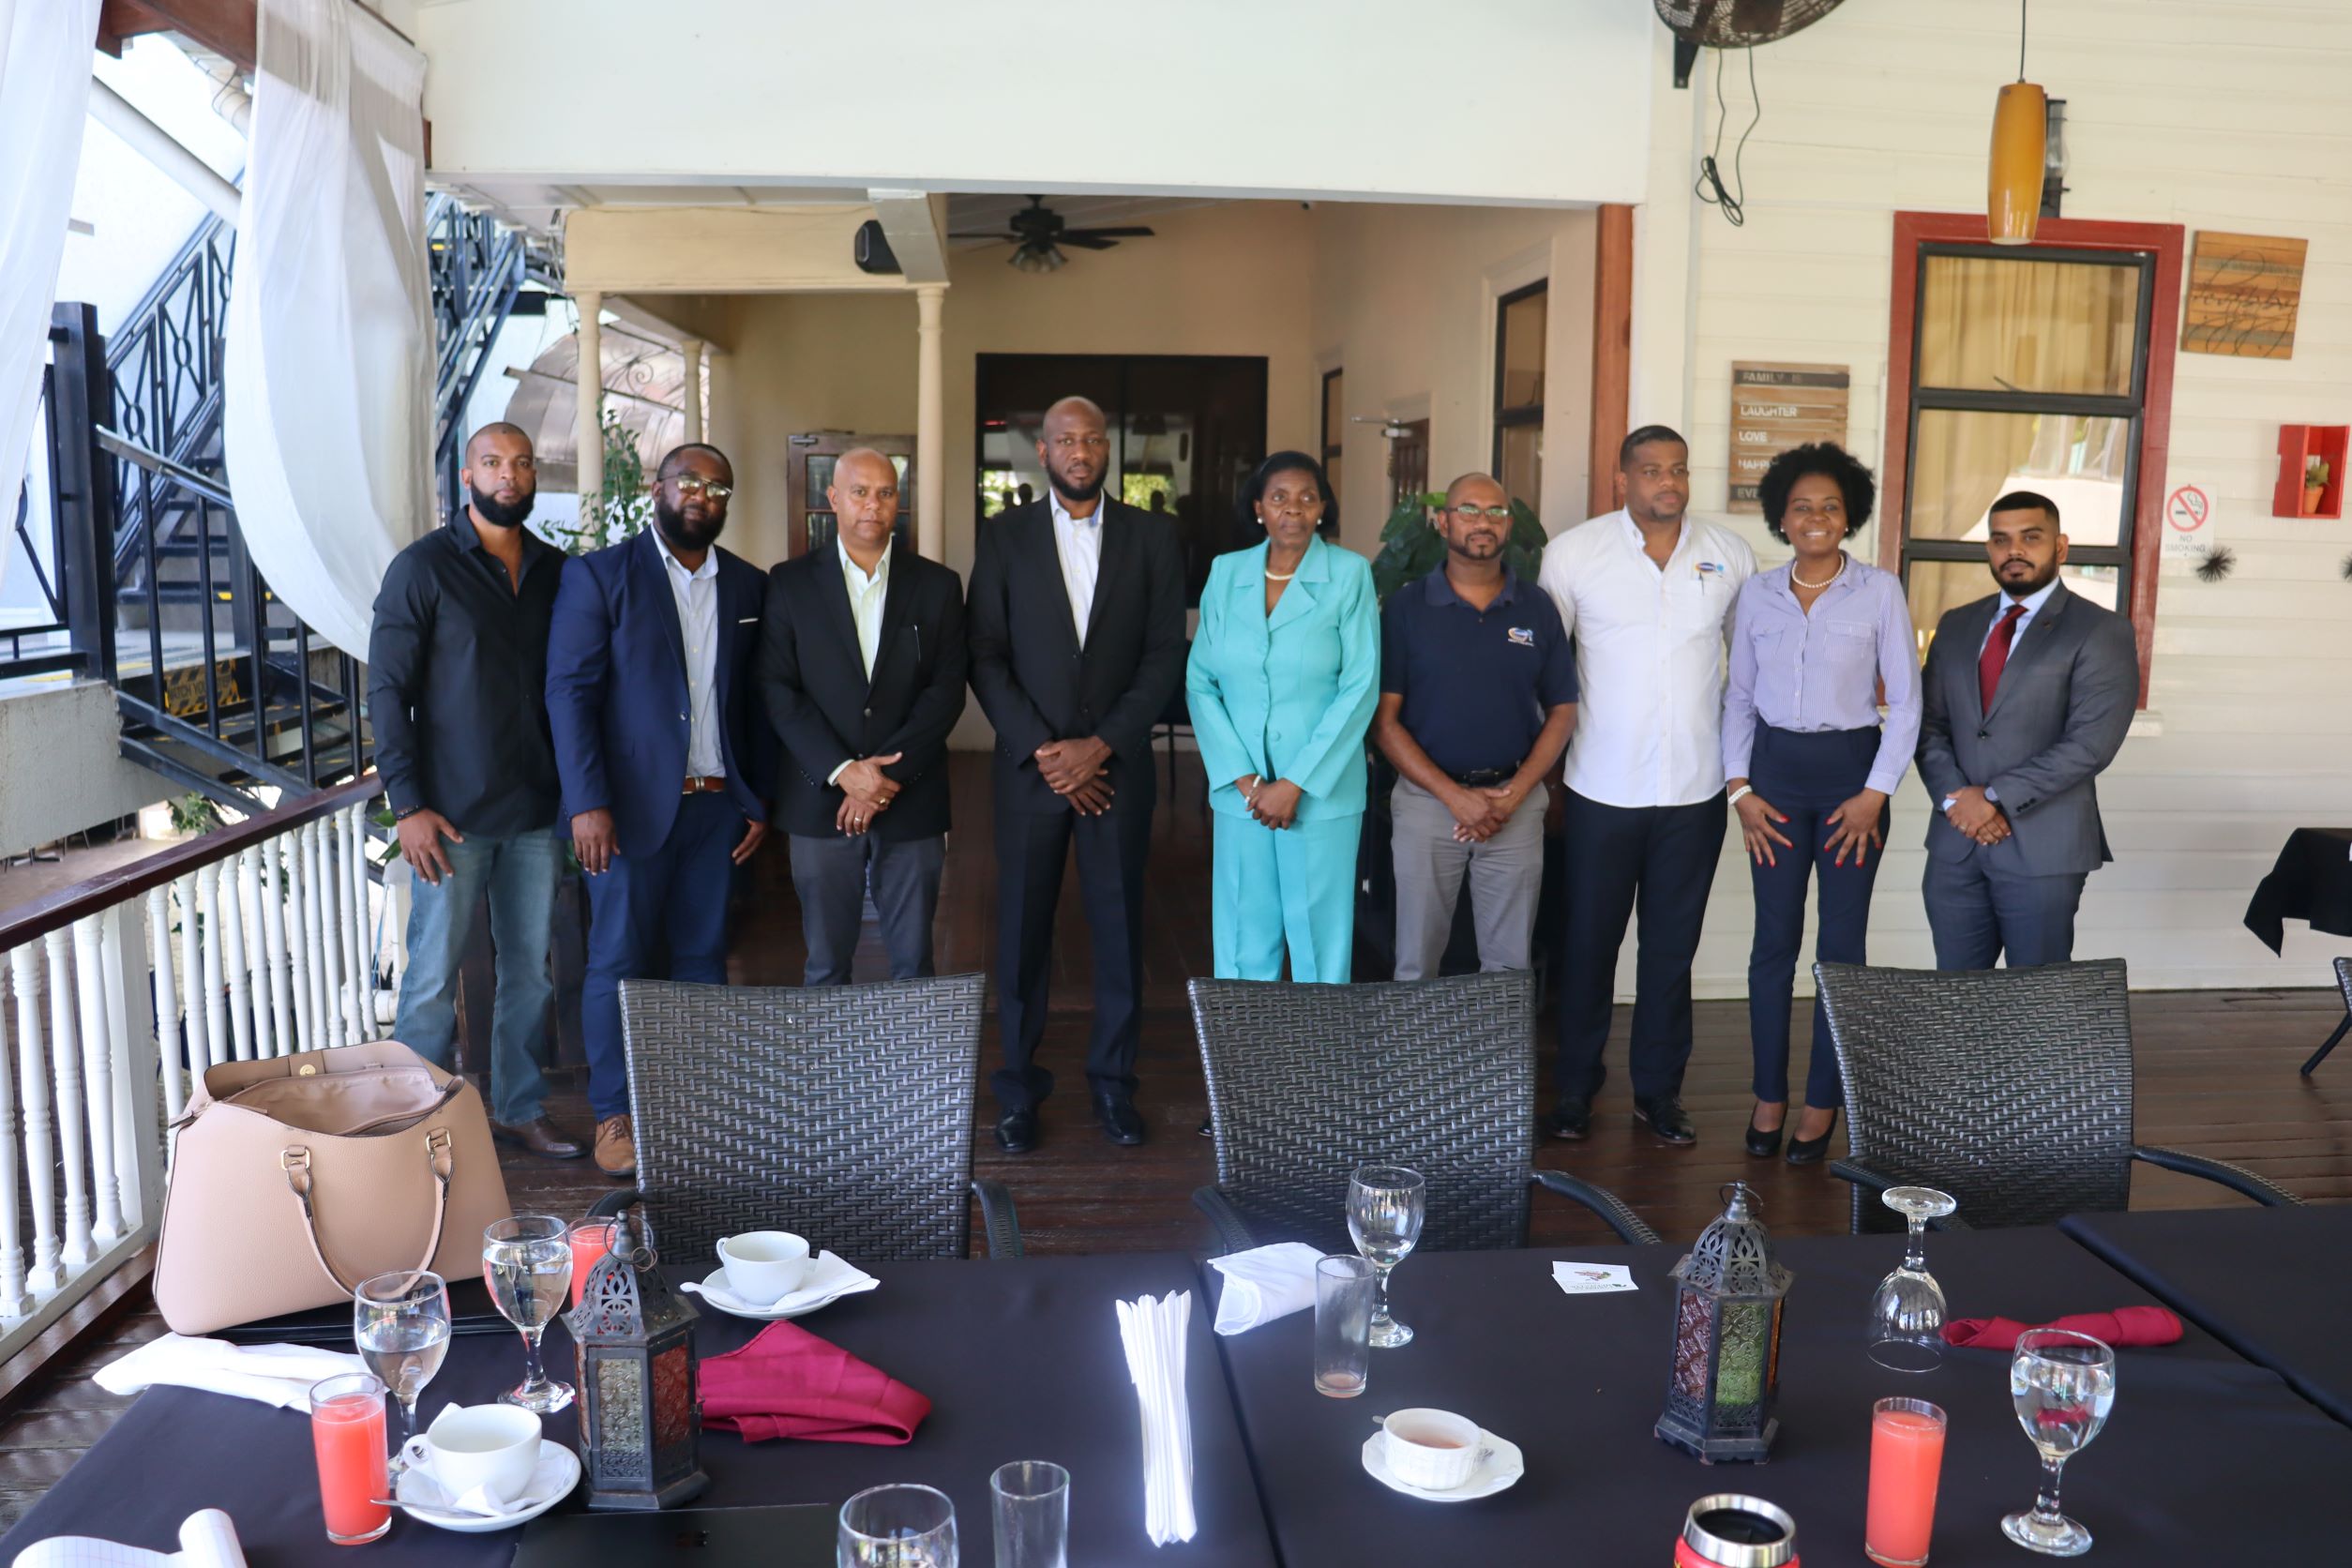 “Export St. Lucia” leads Trade Mission to Guyana to connect with business community/seek investment opportunities